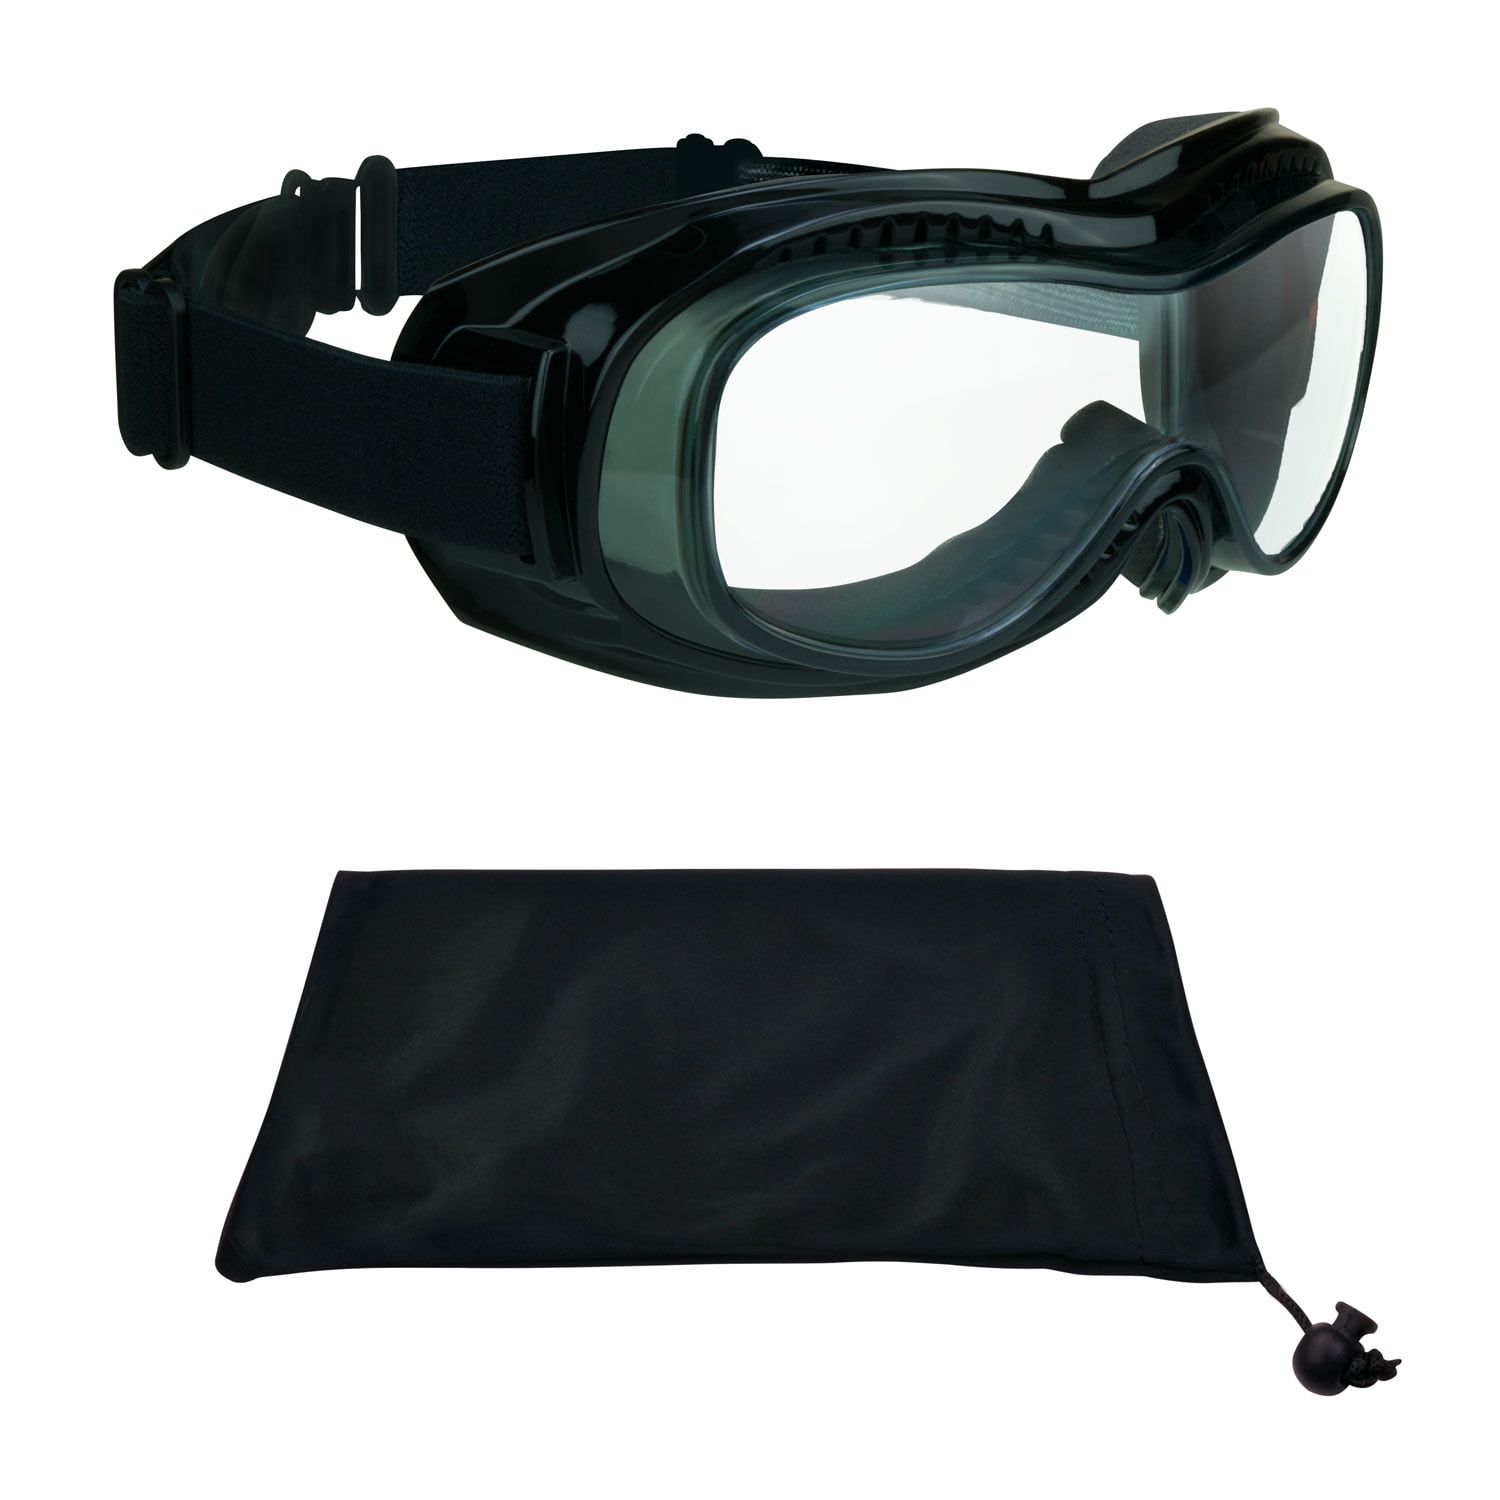 Motorcycle Riding Goggles Windshield with Microfiber Case 